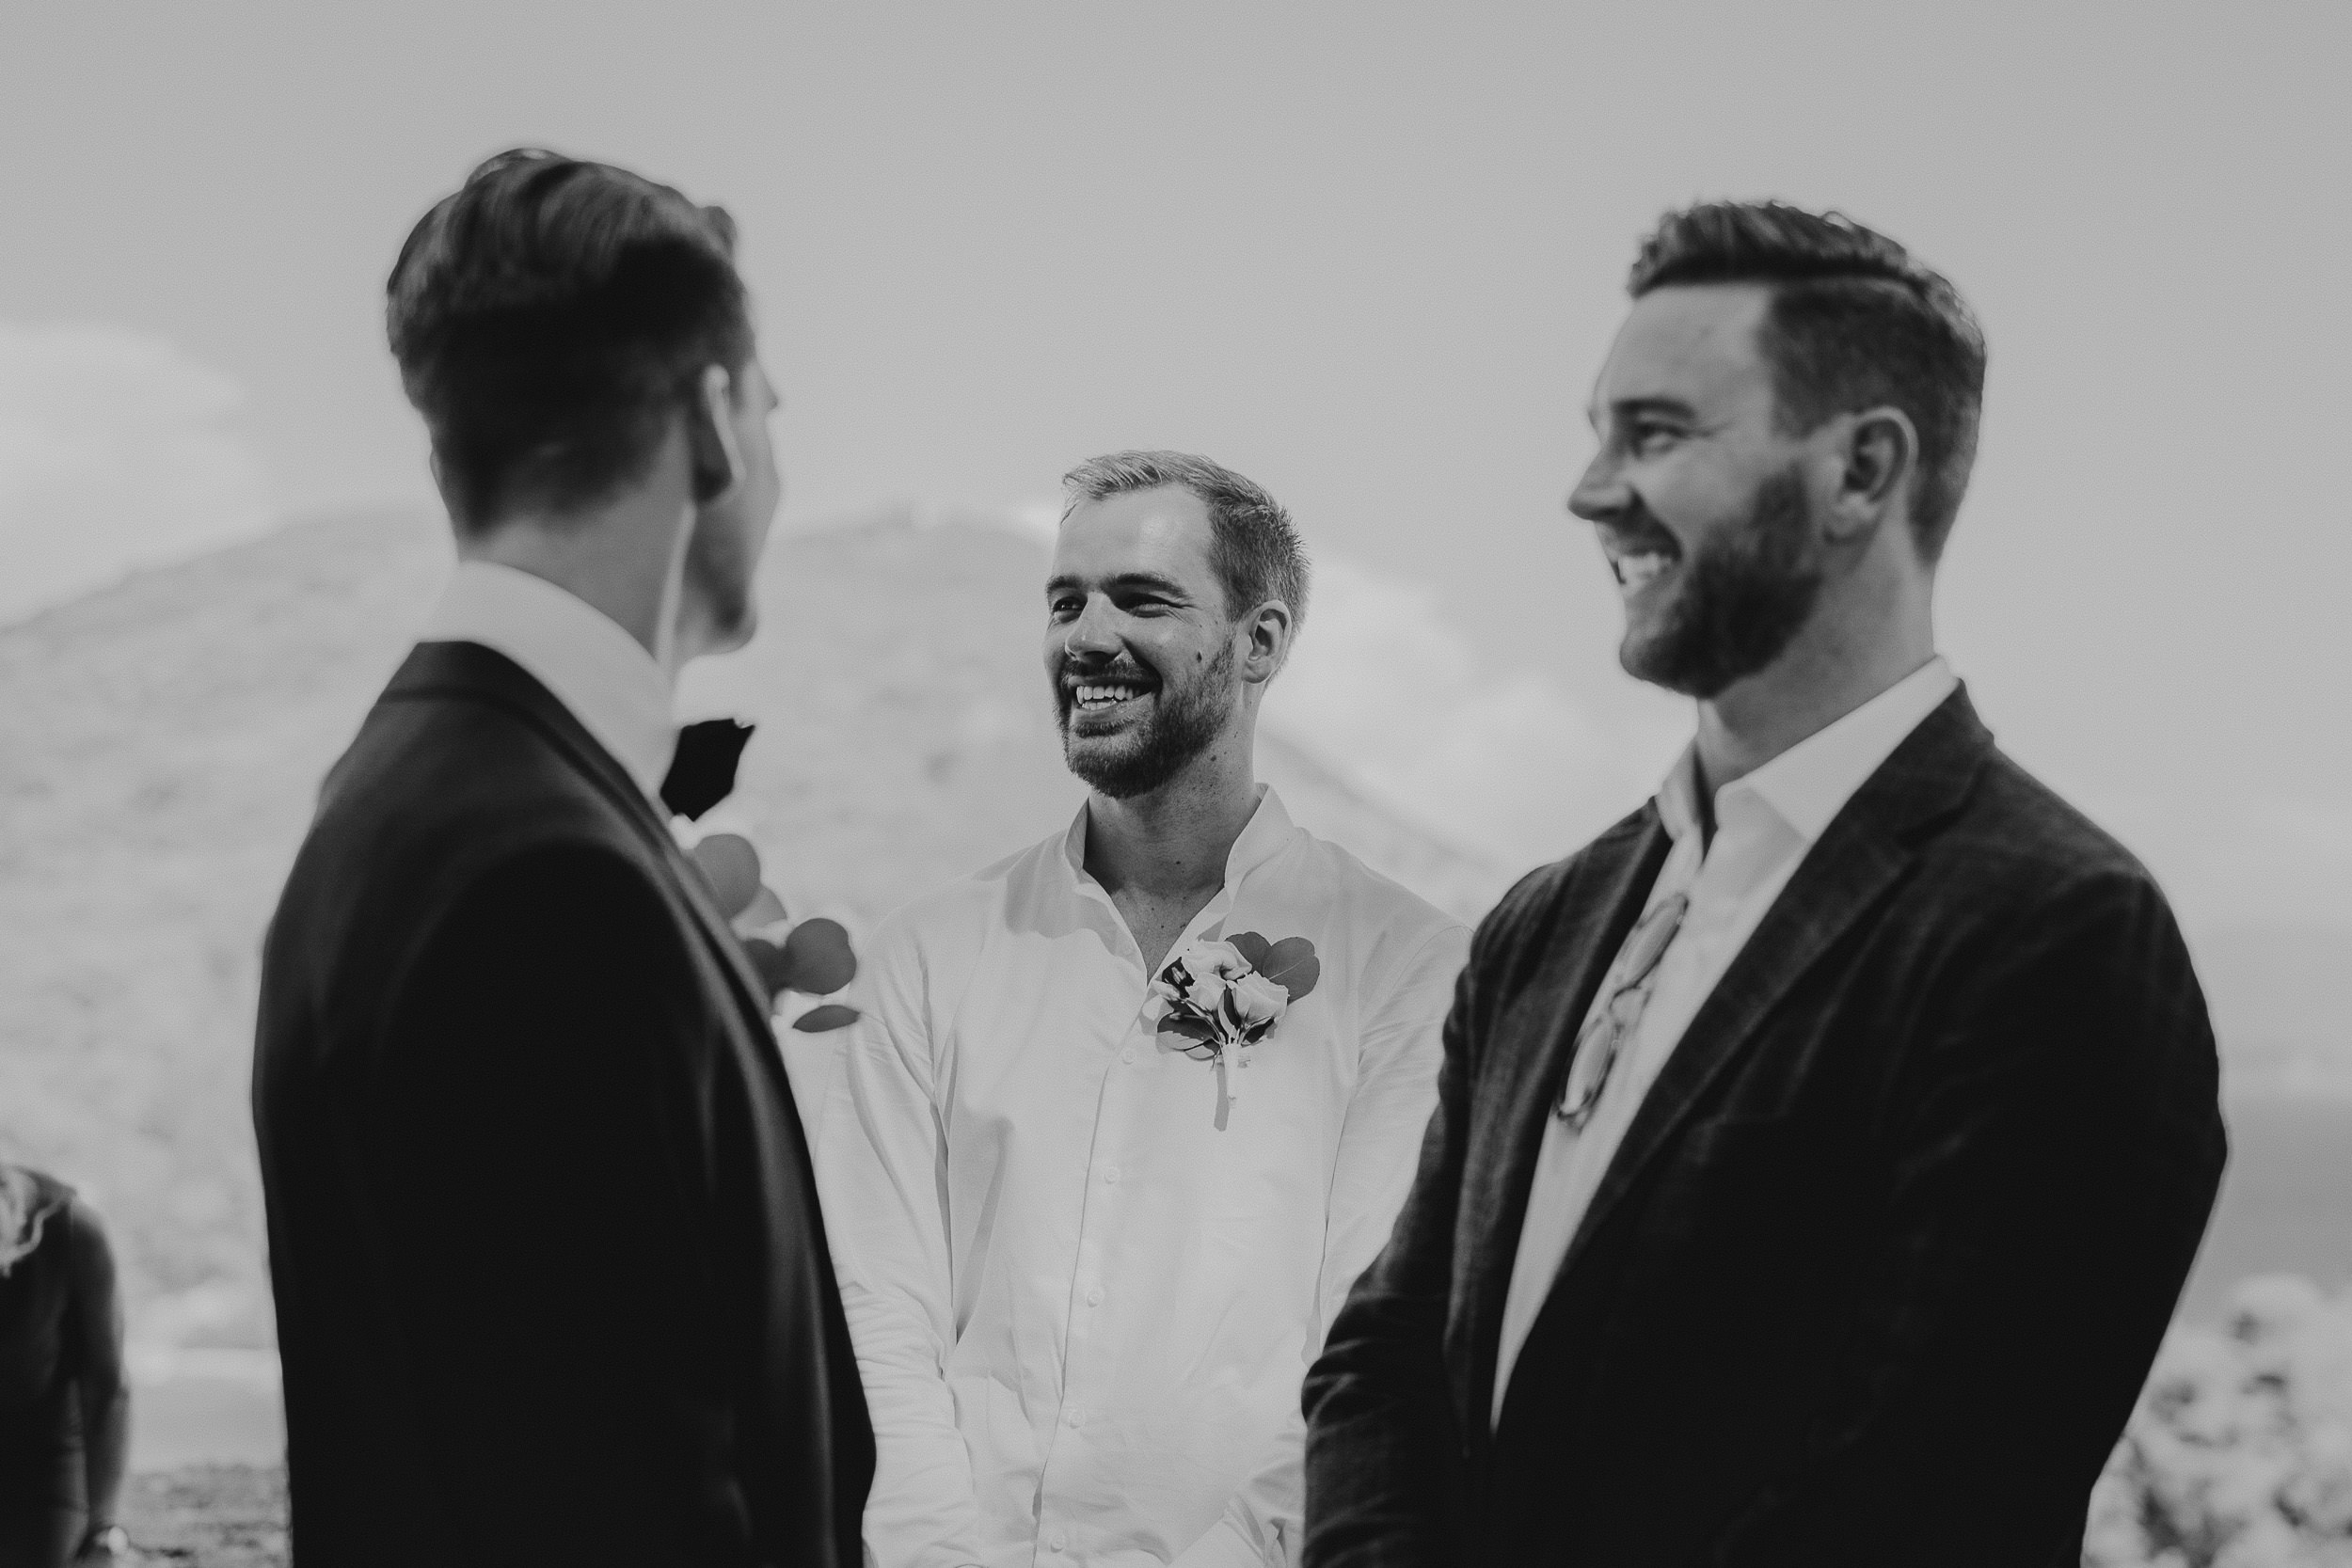 Groom and groomsmen smiling in black and white wedding photo.